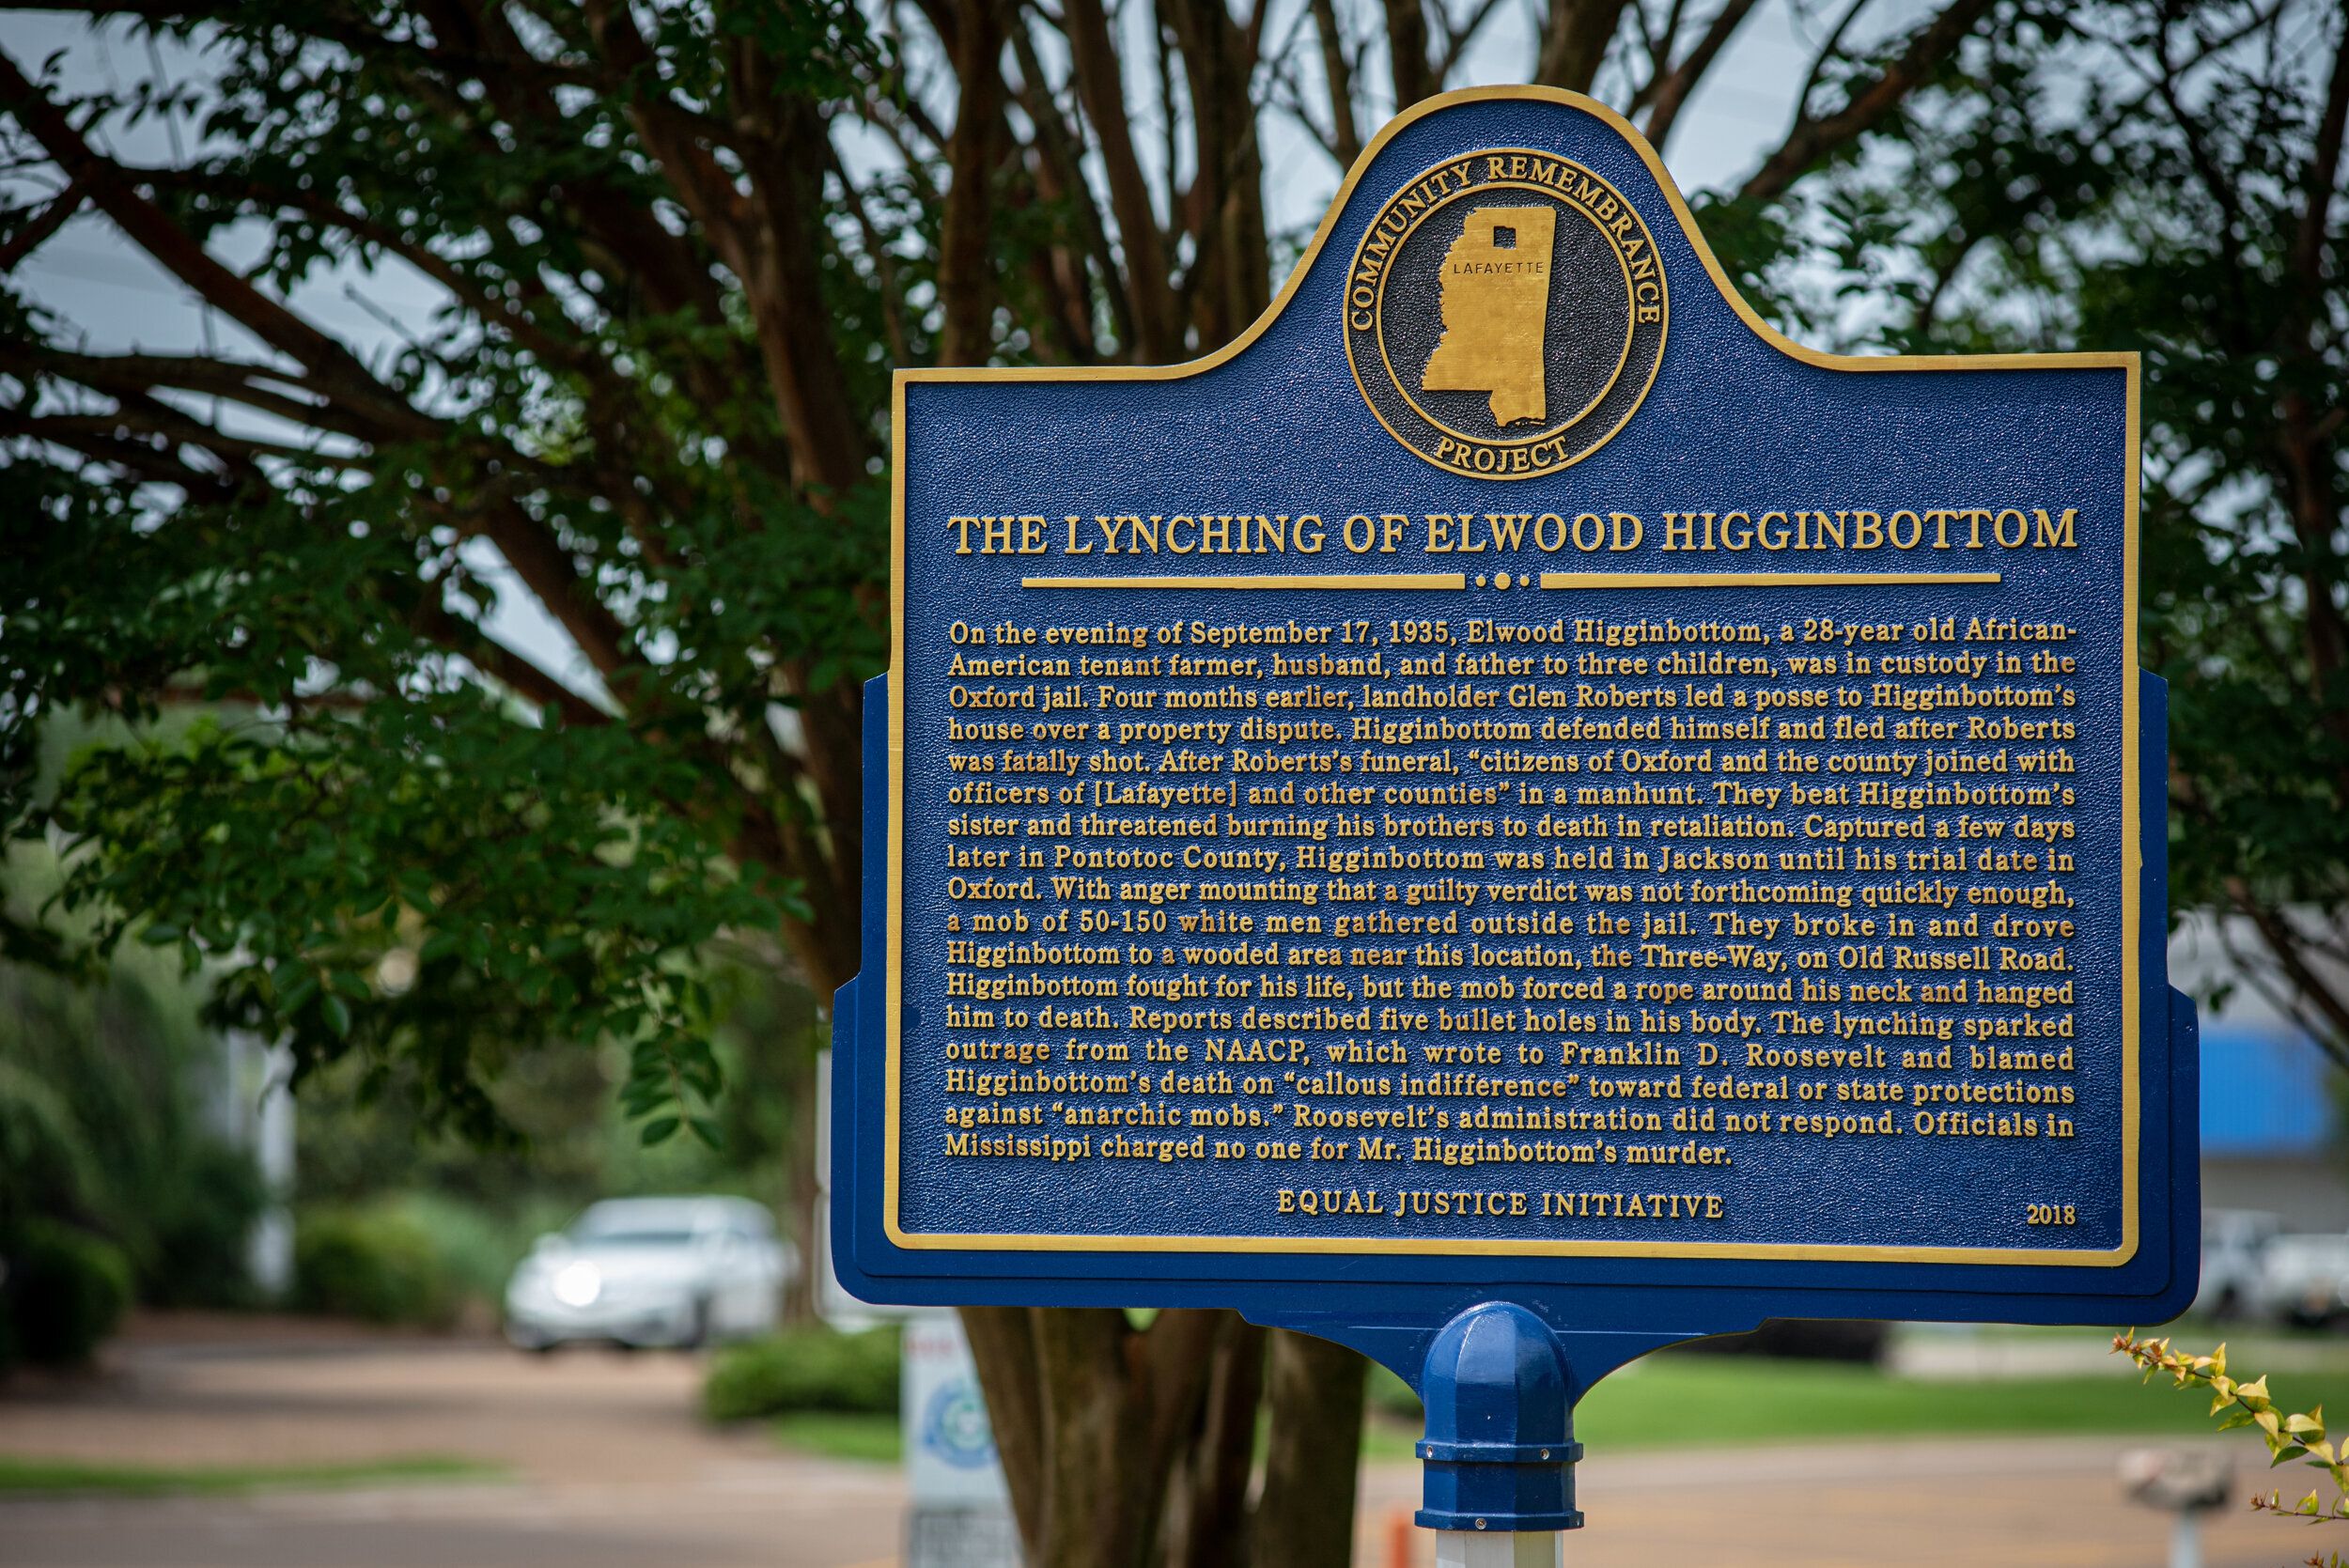 A commemorative plaque marks the spot of the 1935 lynching of Elwood Higginbottom in Oxford, Mississippi. Studies show that a